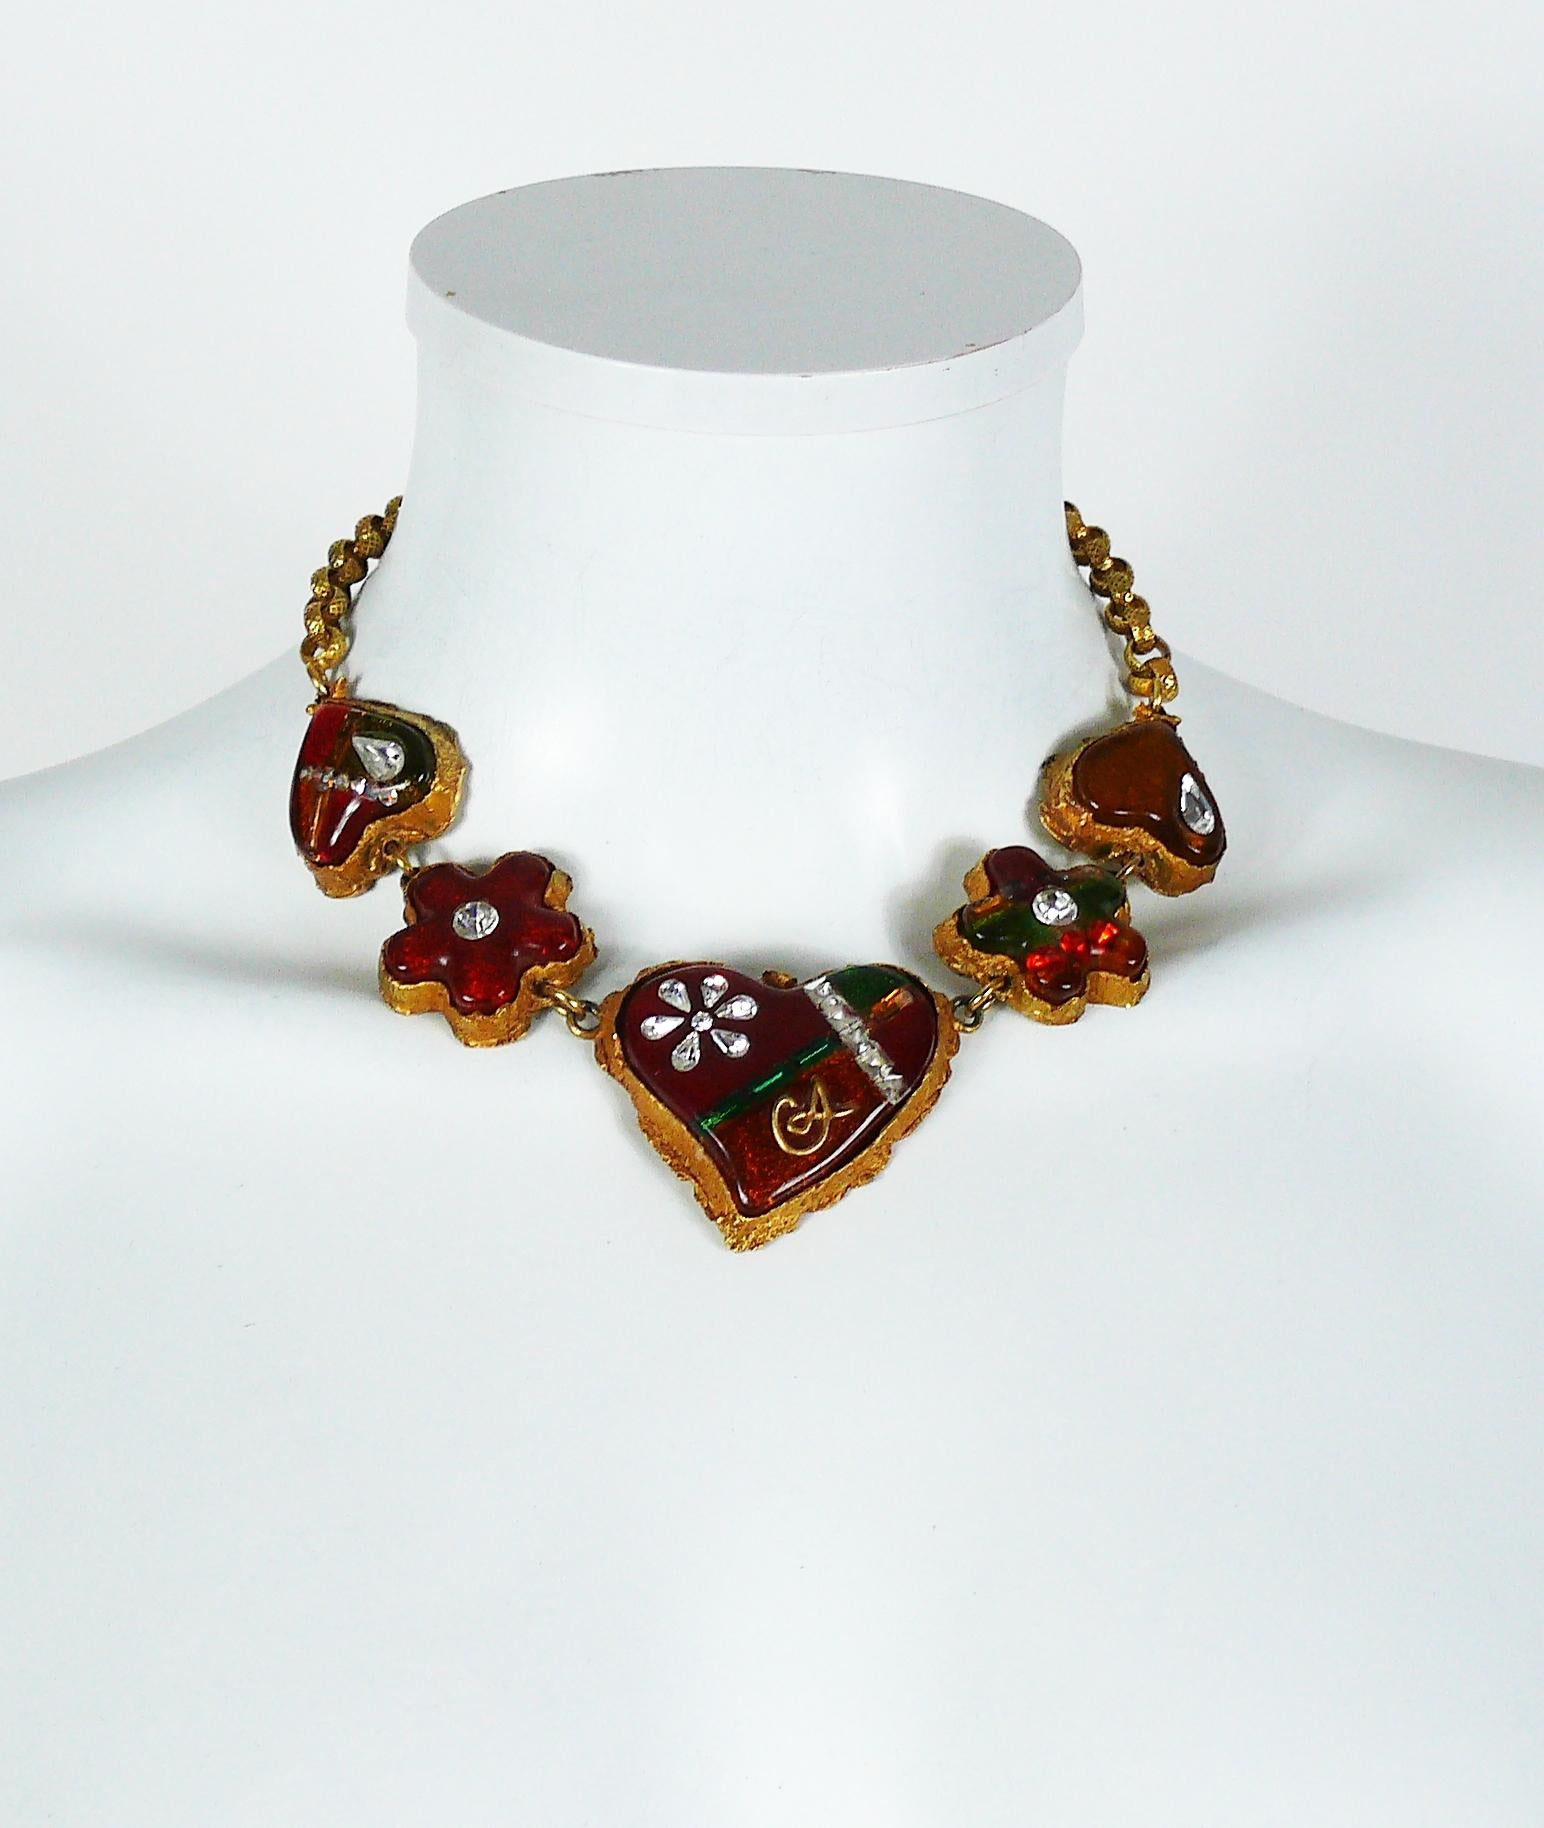 CHRISTIAN LACROIX antiqued gold tone necklace featuring multicolored resin inlaid hearts and flowers with crystal embellishement.

Marked CHRISTIAN LACROIX CL Made in France.

Indicative measurements : max. length approx. 41.5 cm (16.34 inches) /